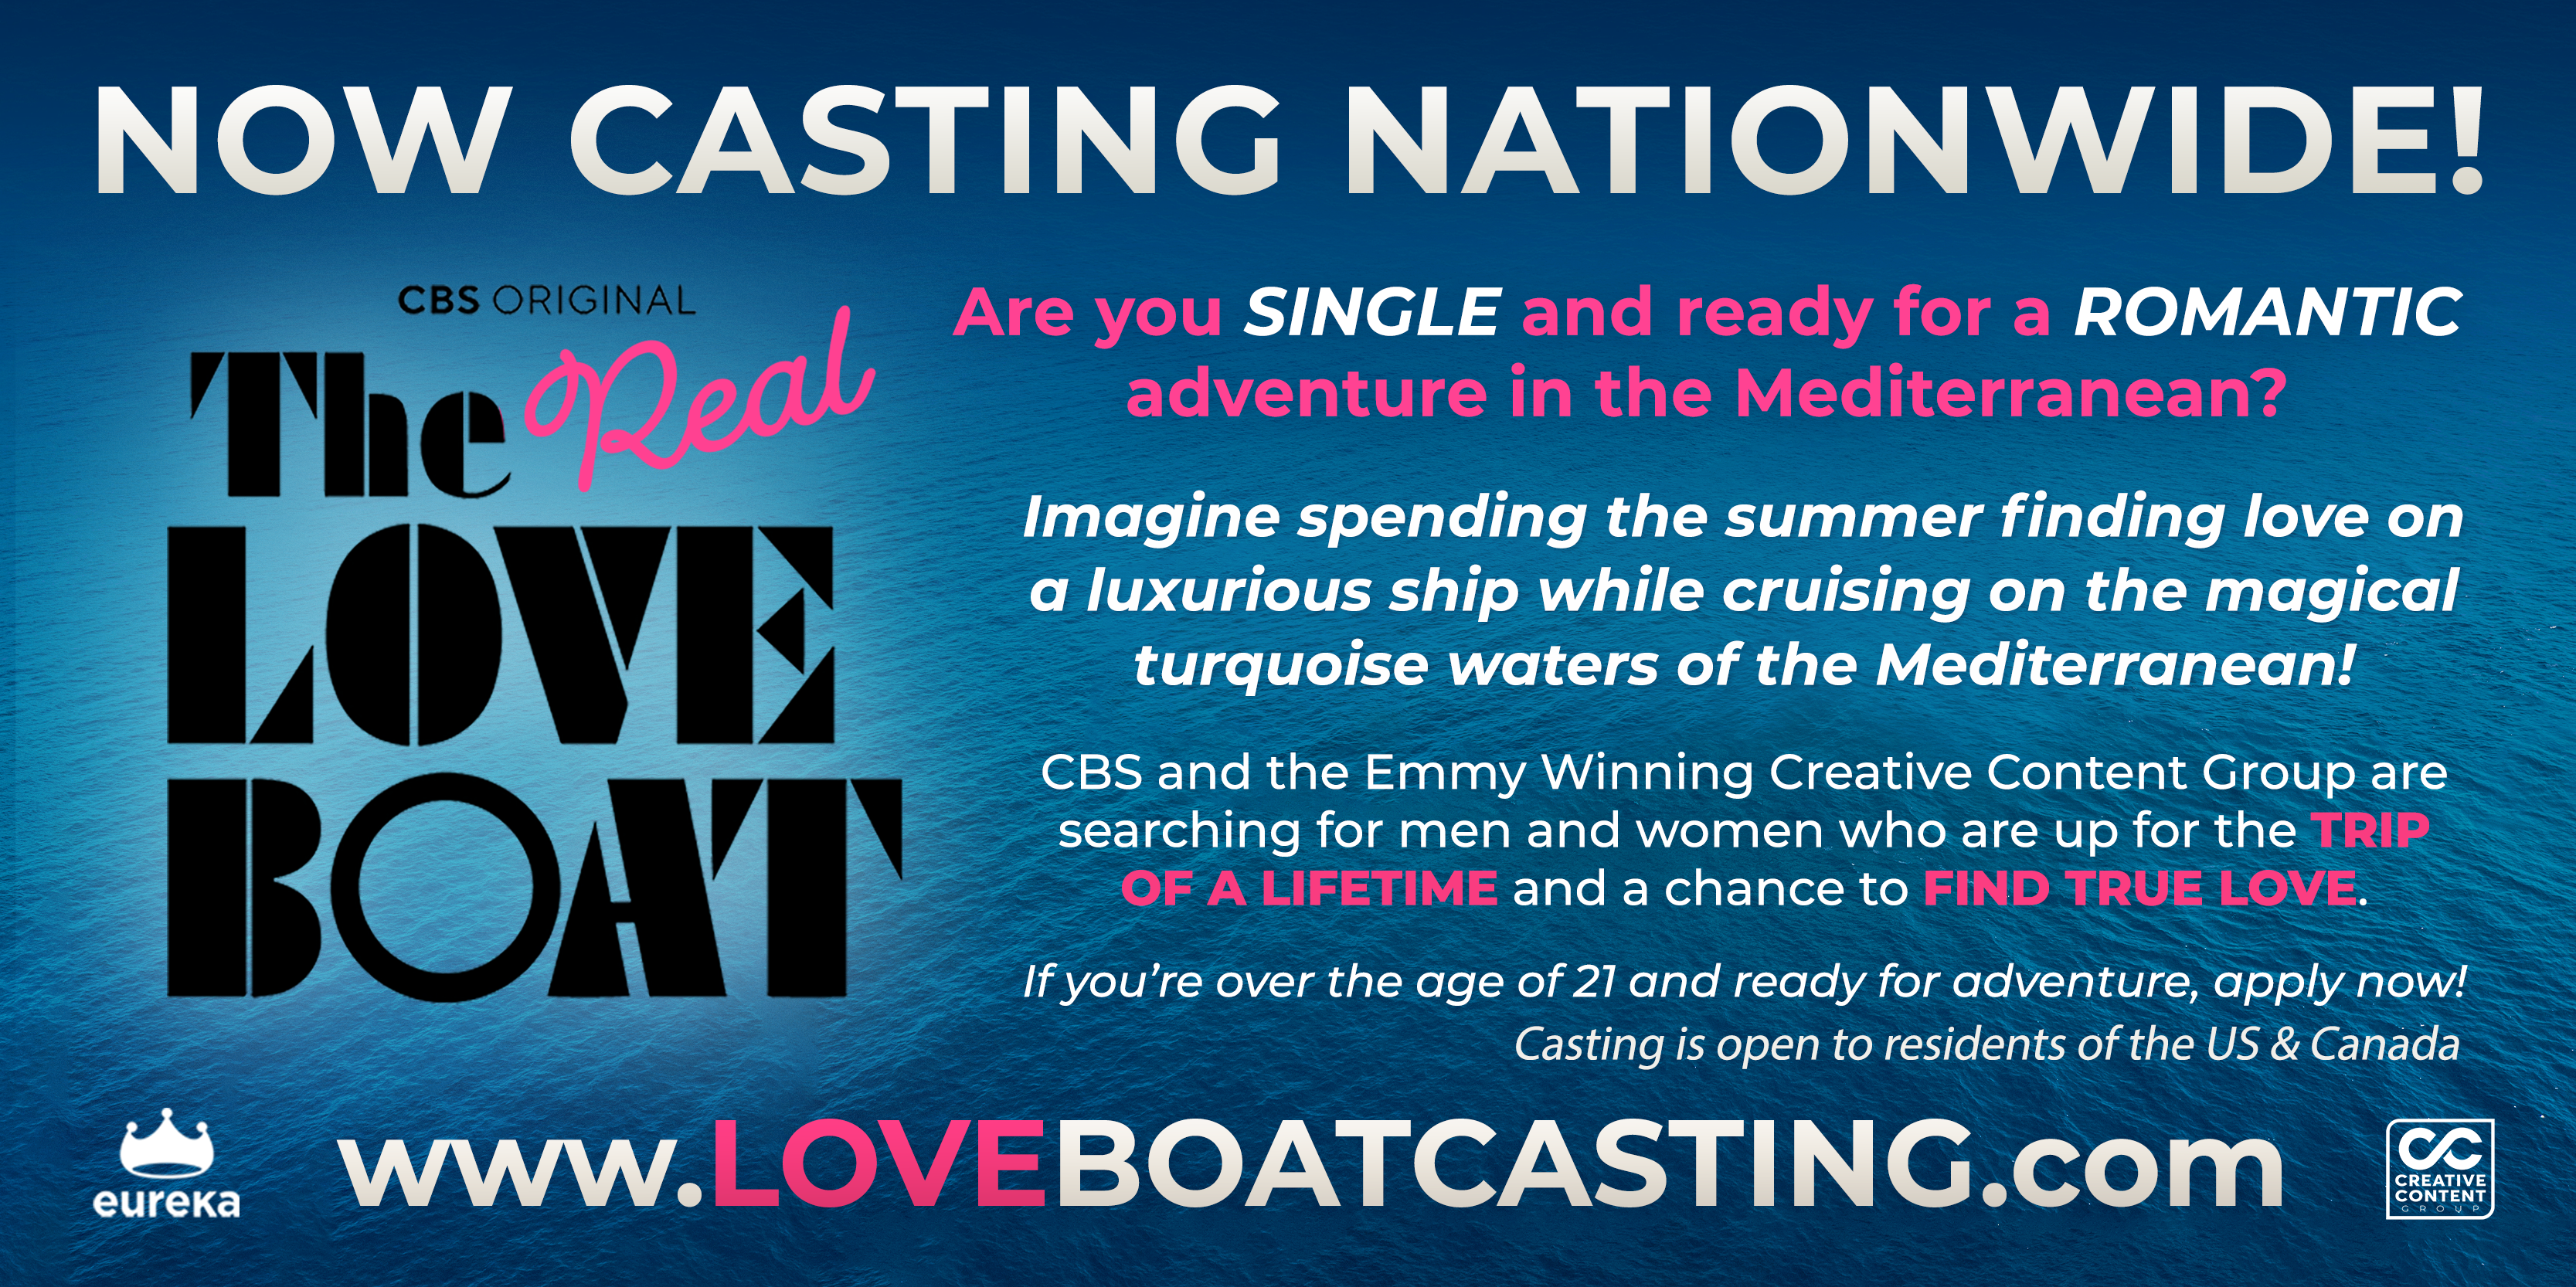 brian shuffield share lesbian reality show casting call photos